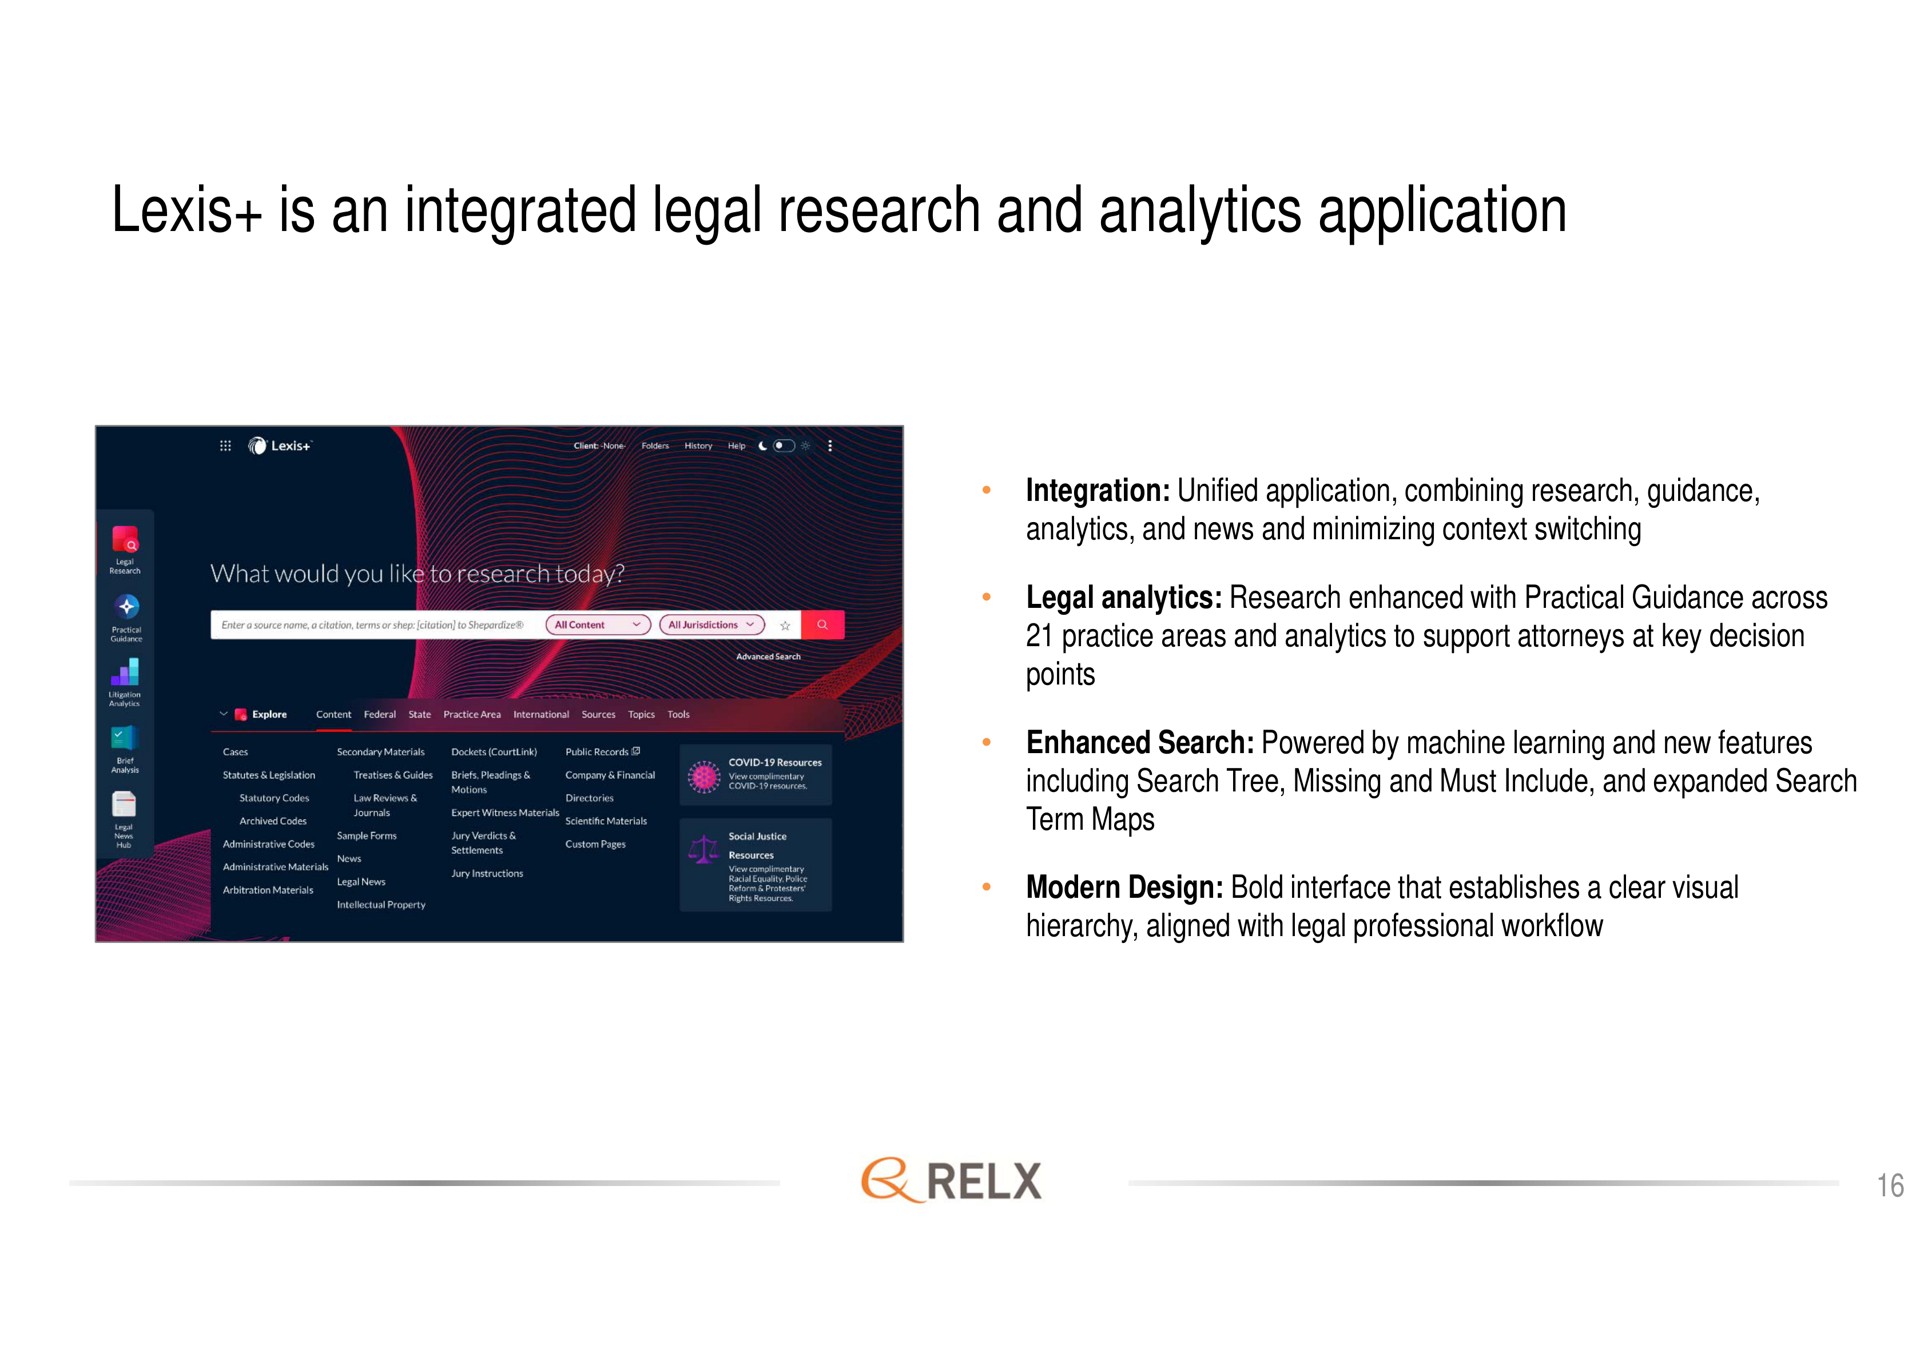 is an integrated legal research and analytics application | RELX